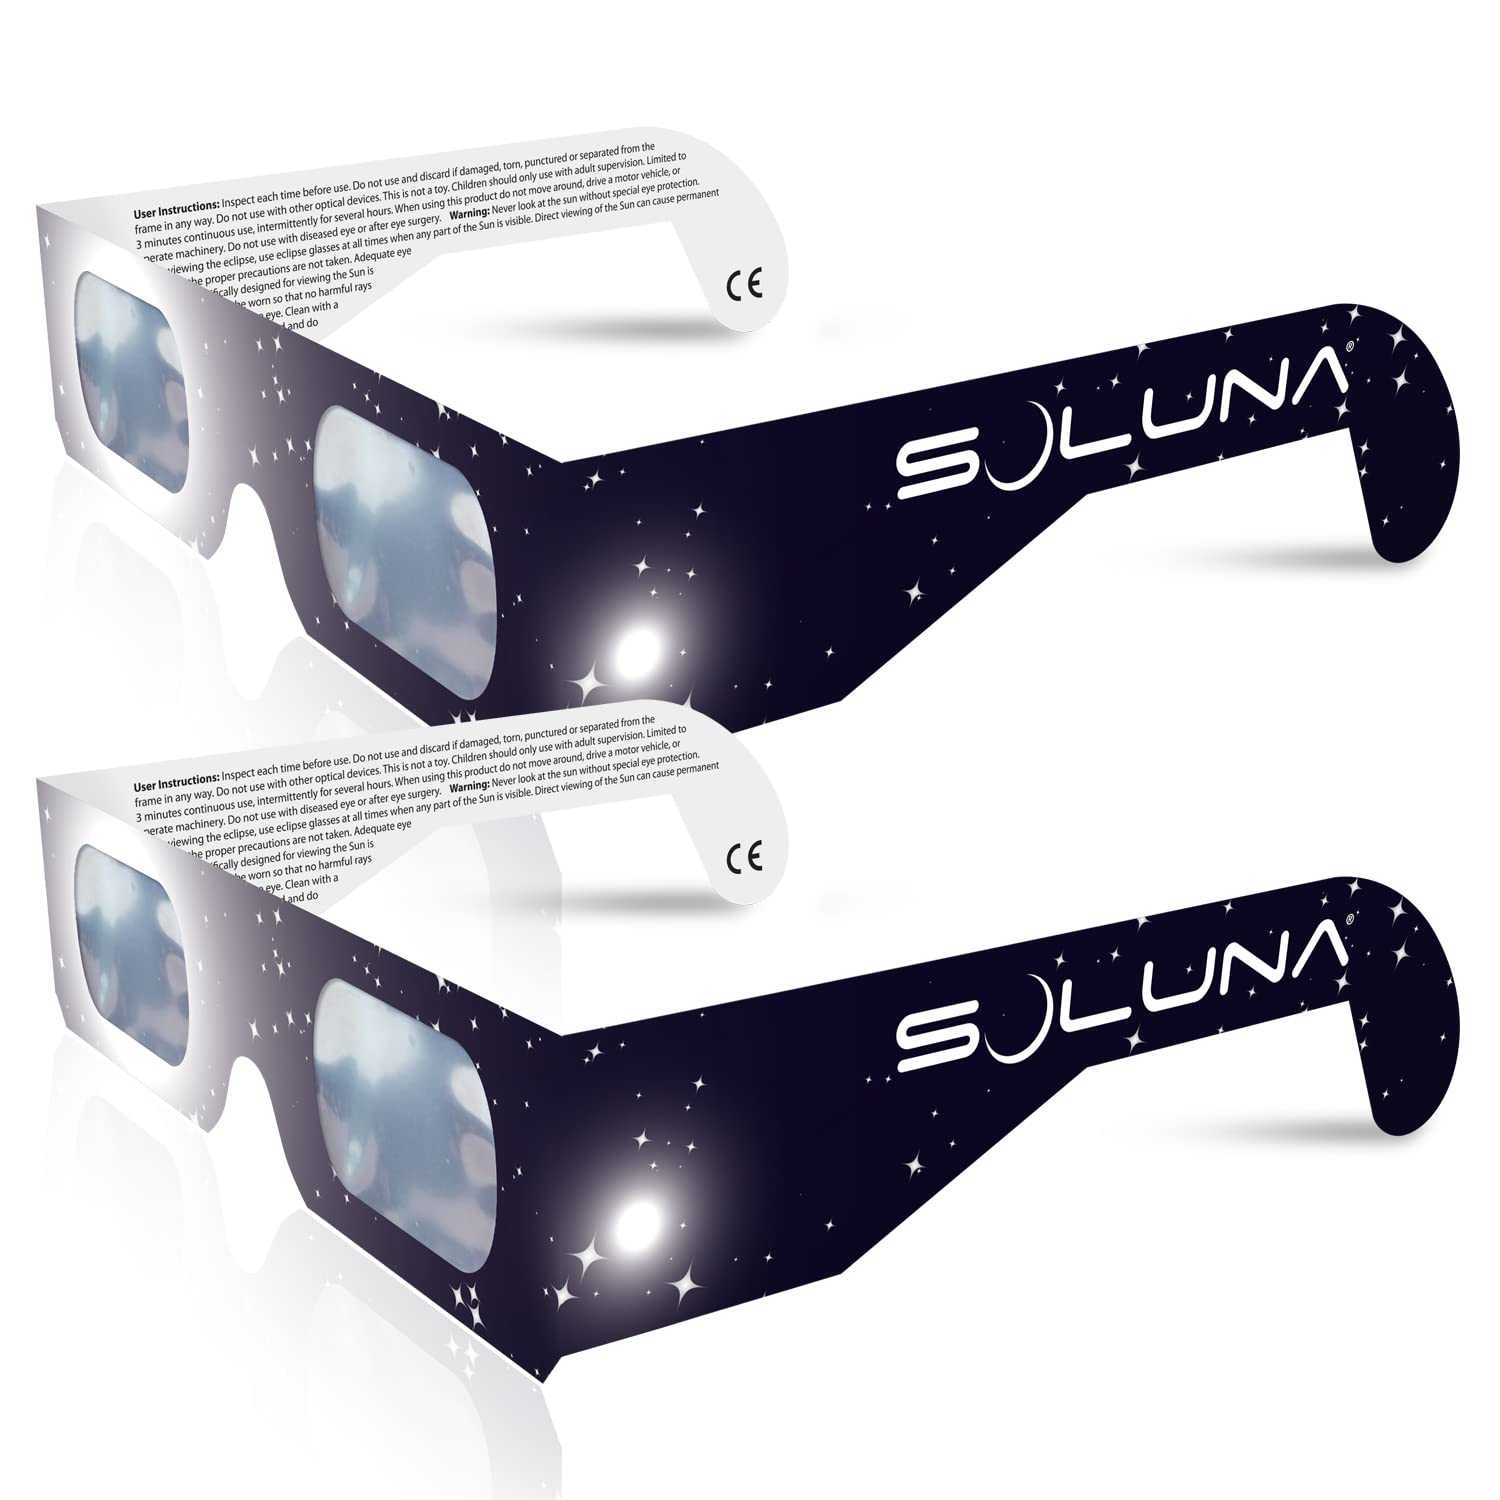 Where to buy solar eclipse glasses for annular, total eclipses